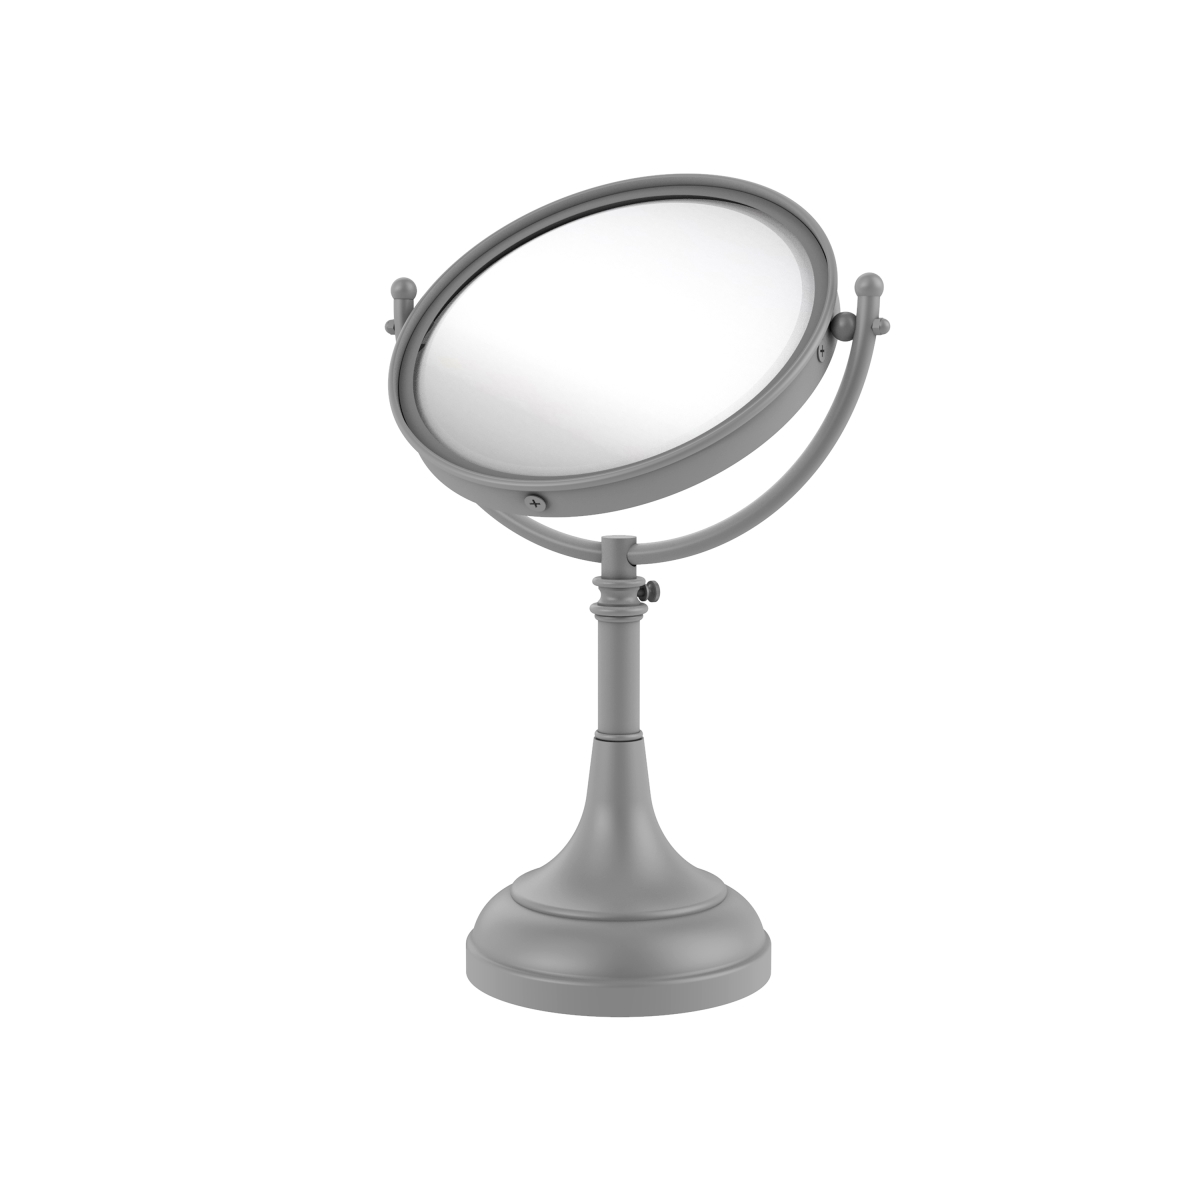 Picture of Allied Brass DM-1-5X-GYM 8 in. Height Adjustable Vanity Top Make-Up Mirror 5X Magnification, Matte Gray